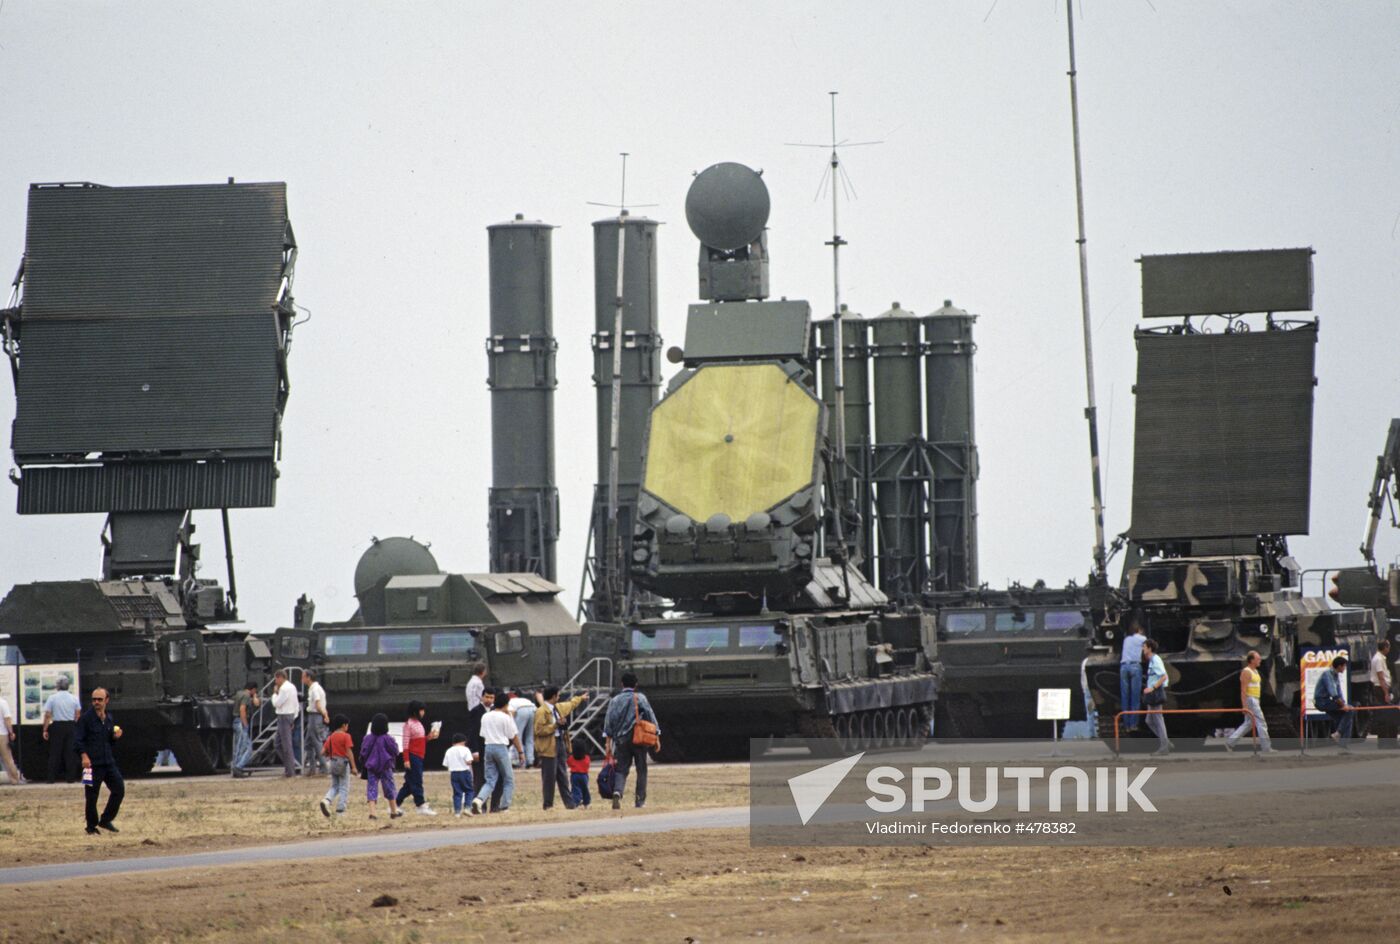 S-300 air defense missile system on display